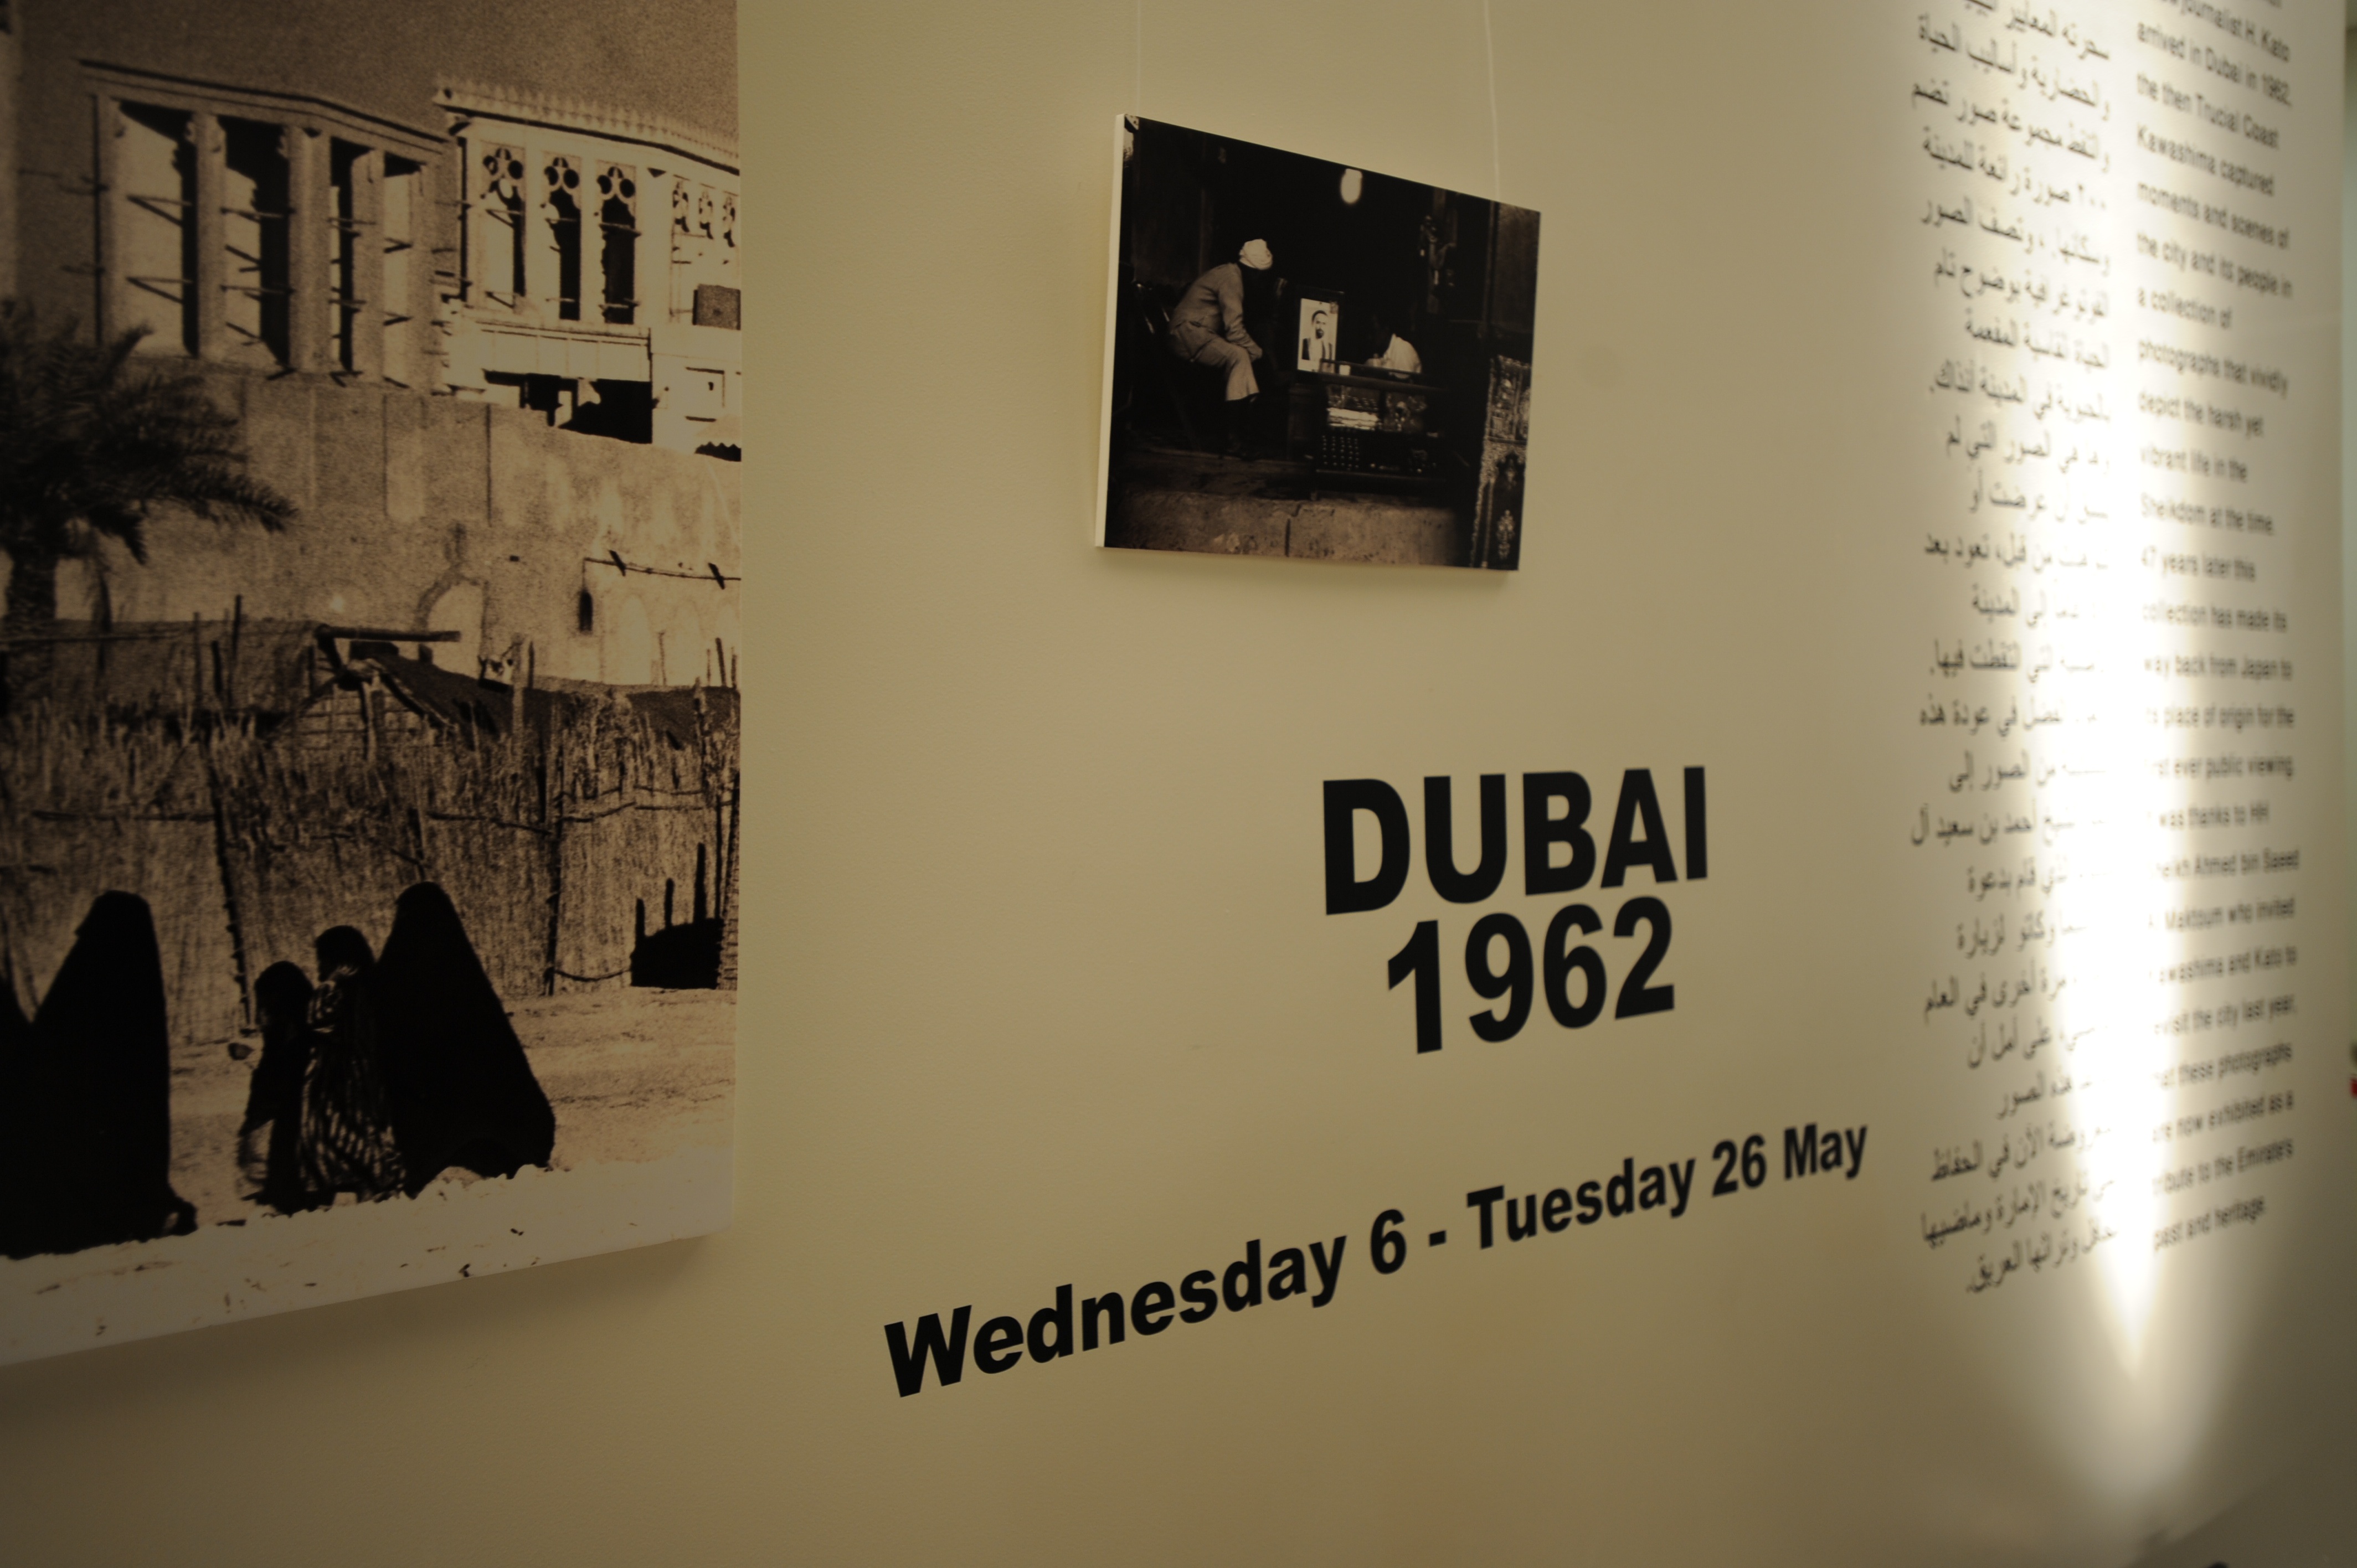 Jieun Lee/CNN. Entrance of the Dubai 1962 exhibit held at the Gallery of Light, DUCTAC, Mall of the Emirates